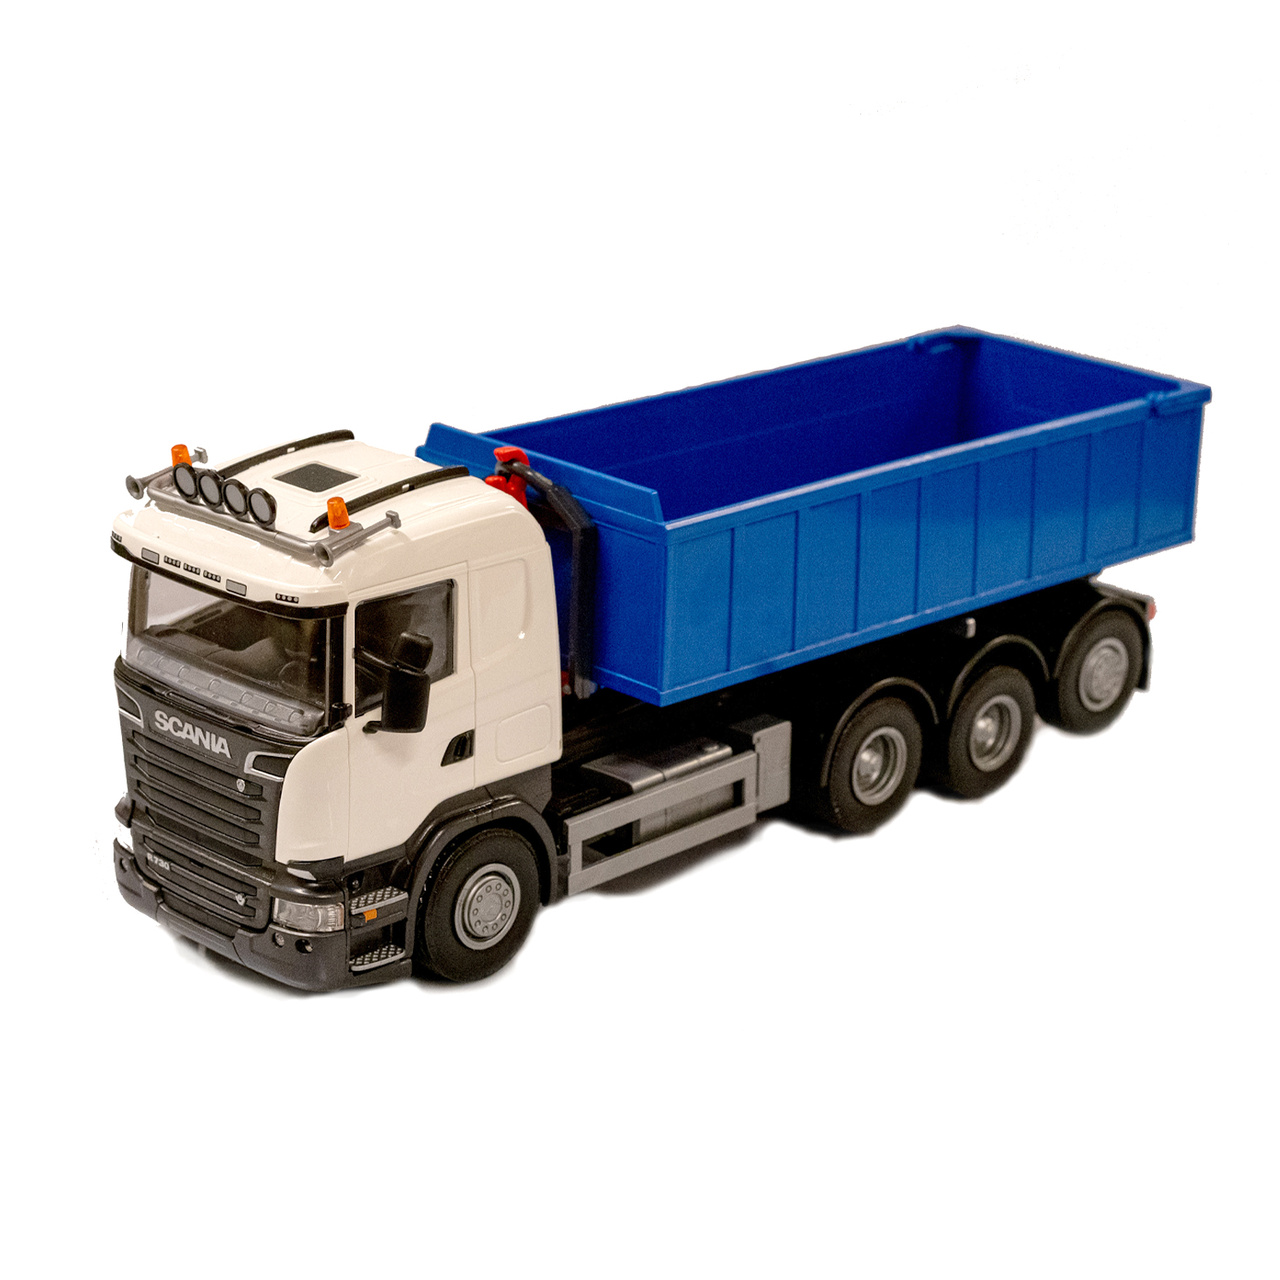 EMEK TOY CAR TRUCK WITH HOOK LIFT SCANIA WHITE 1:25